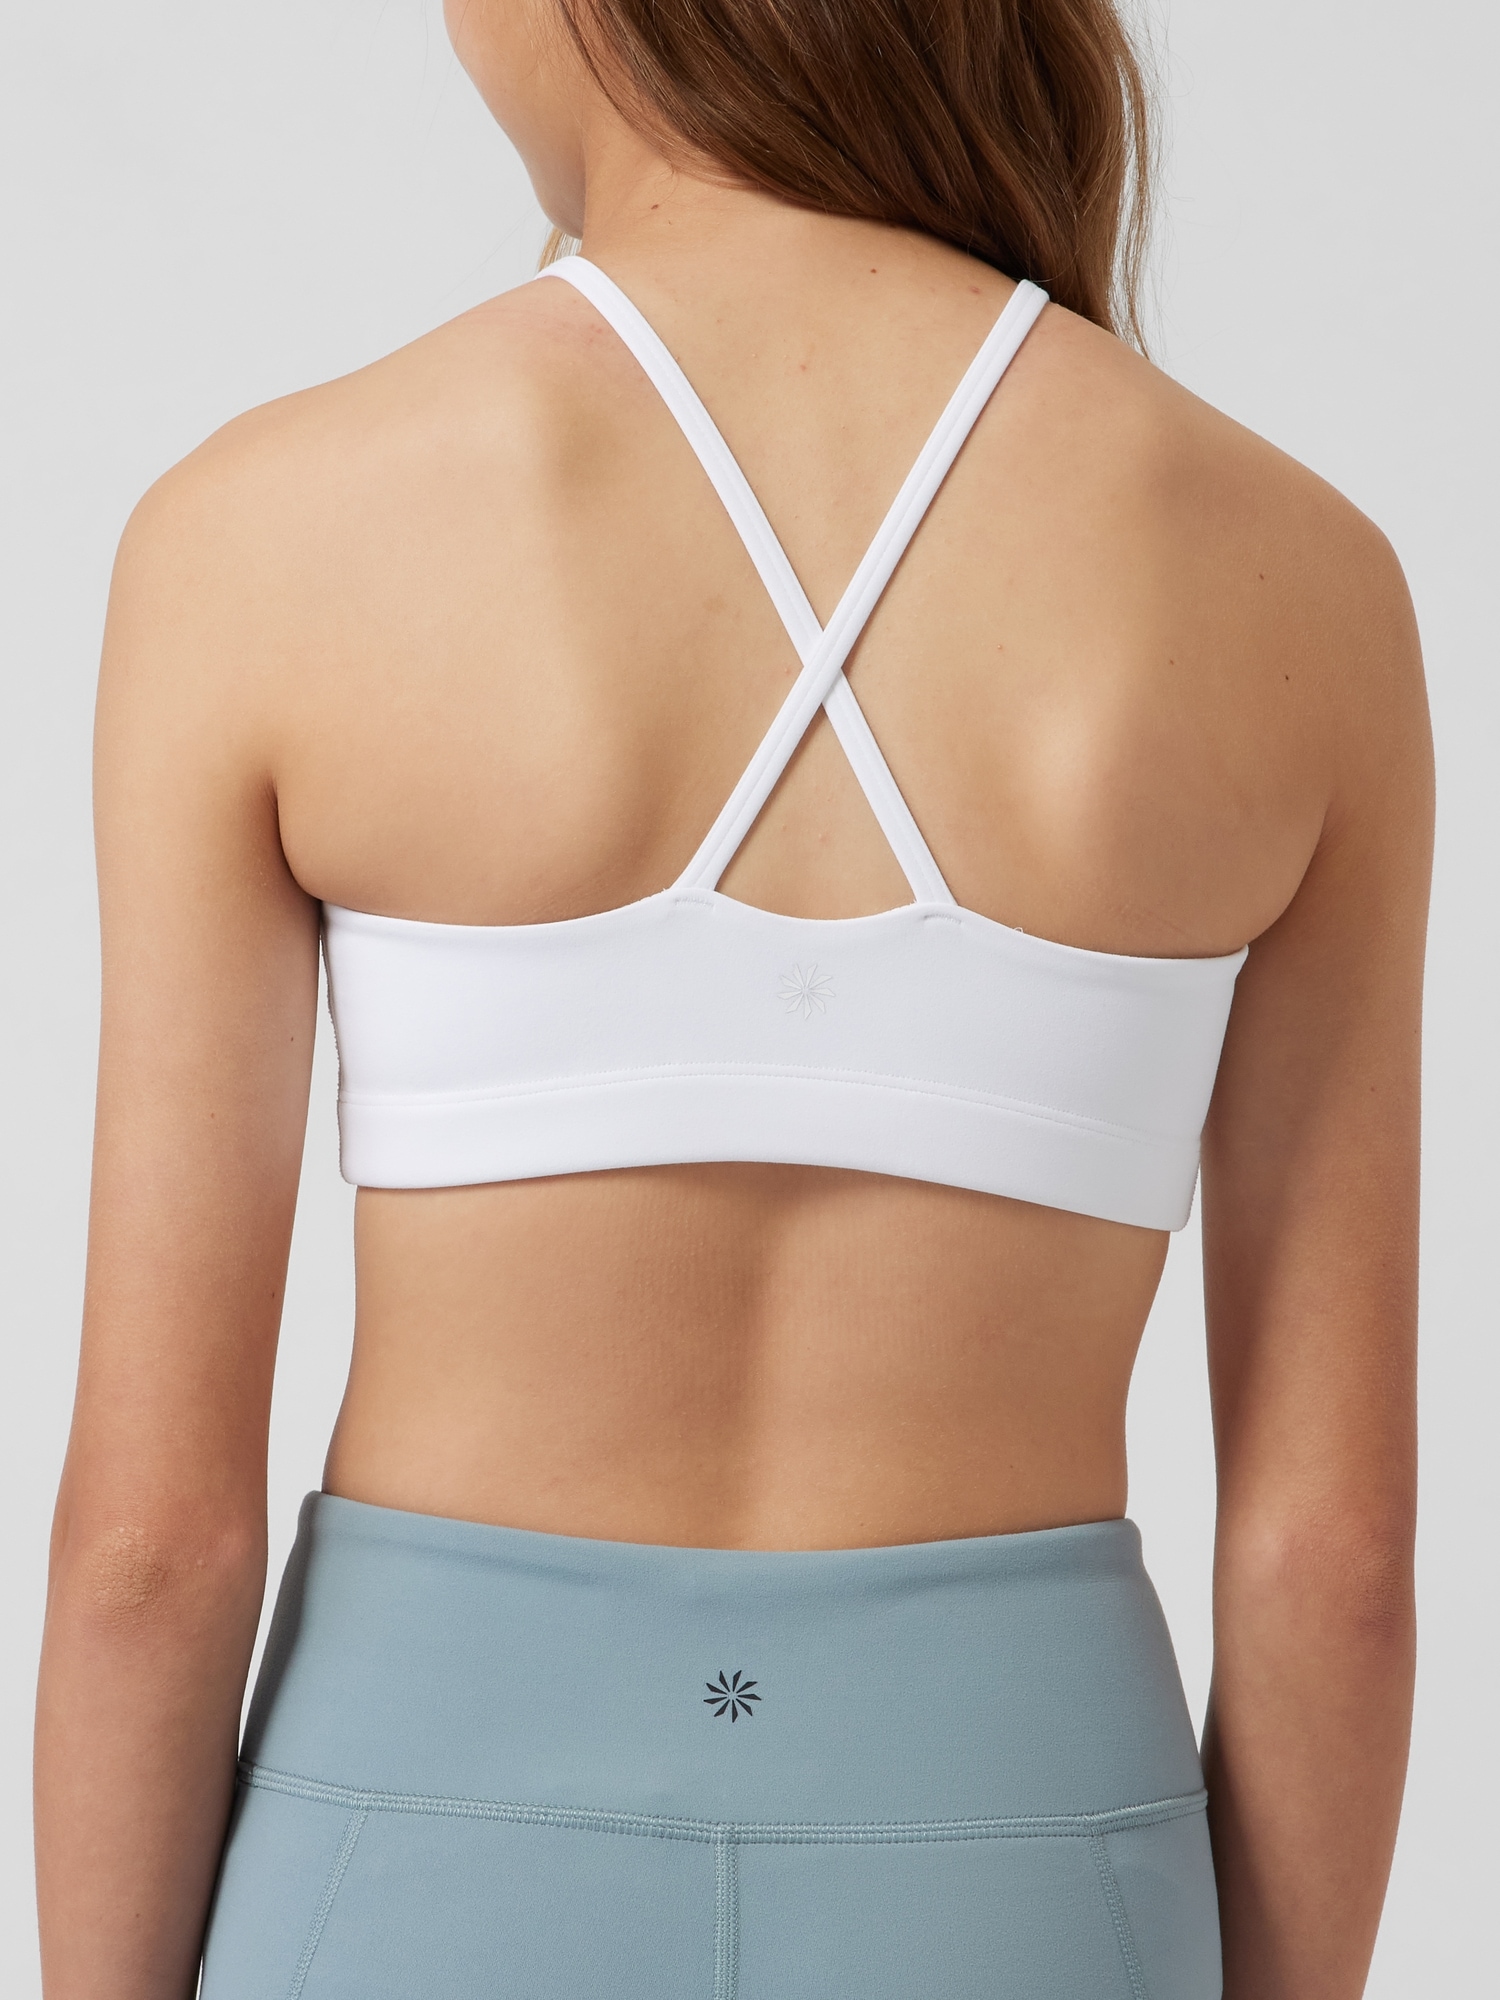 Athleta Girl Strappy Multicolored Soft Sports Bra with Removable